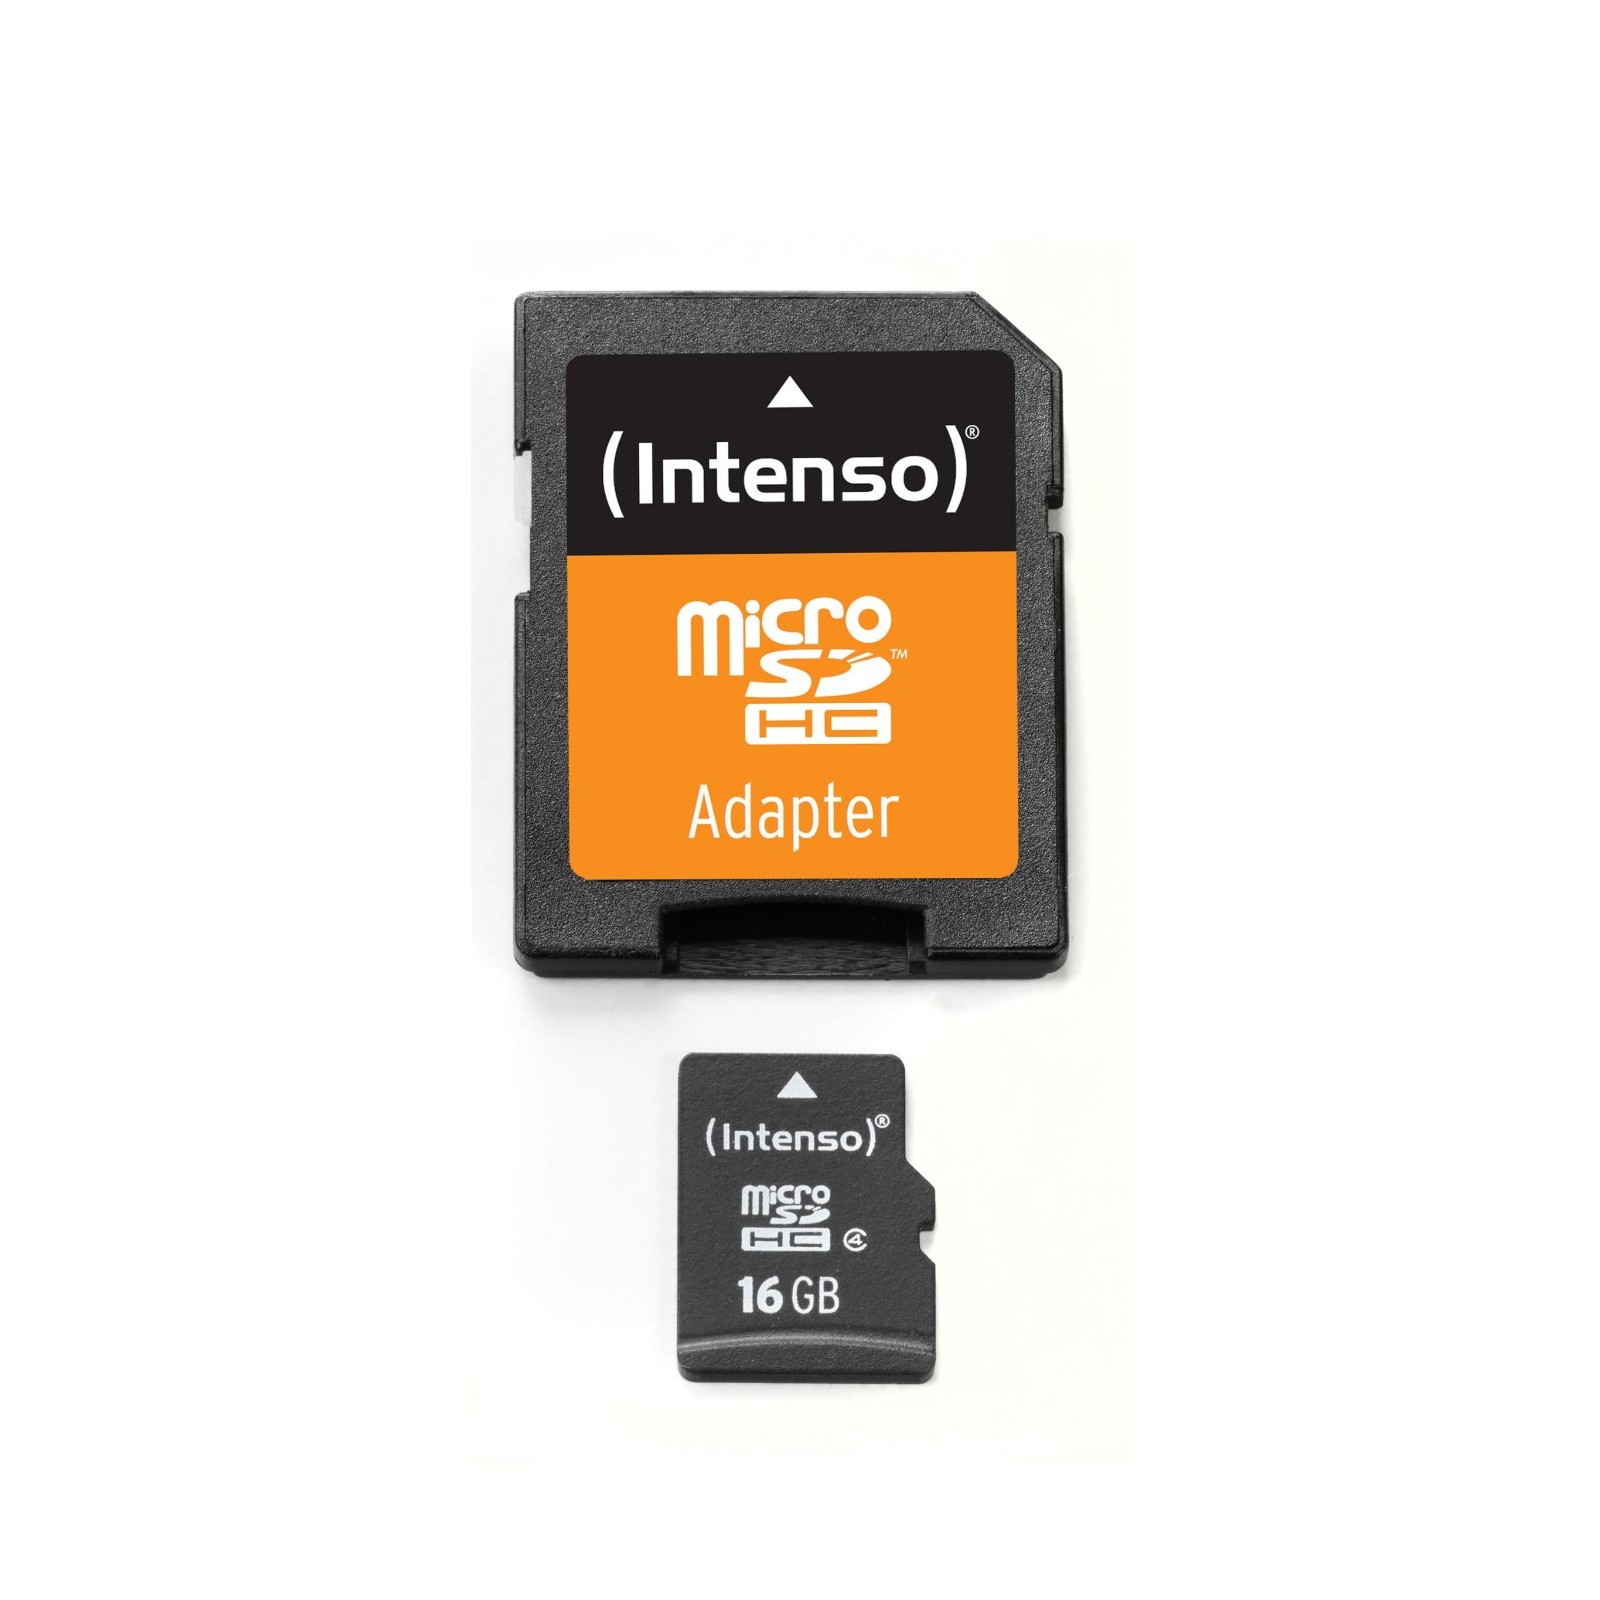 Intenso SD Card Micro 16GB mit Adapter